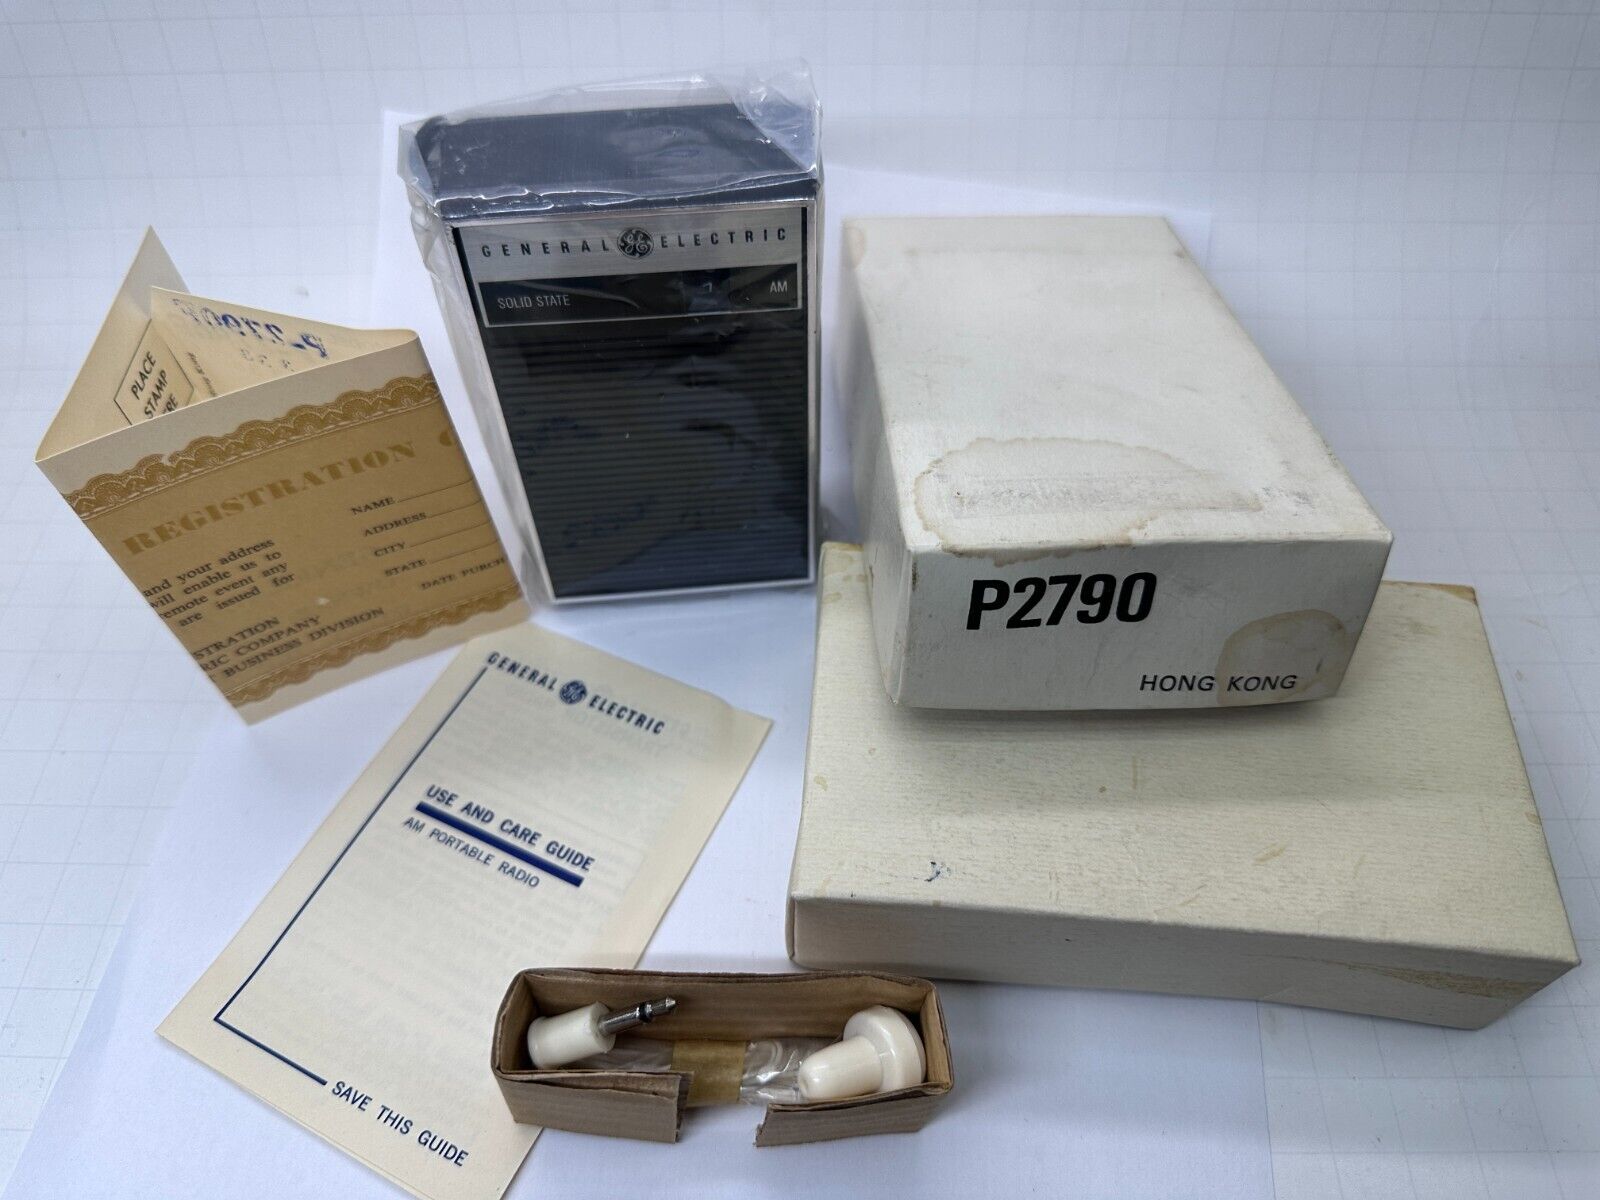 Vintage General Electric P2790 Solid State AM Radio New in Box Hong Kong